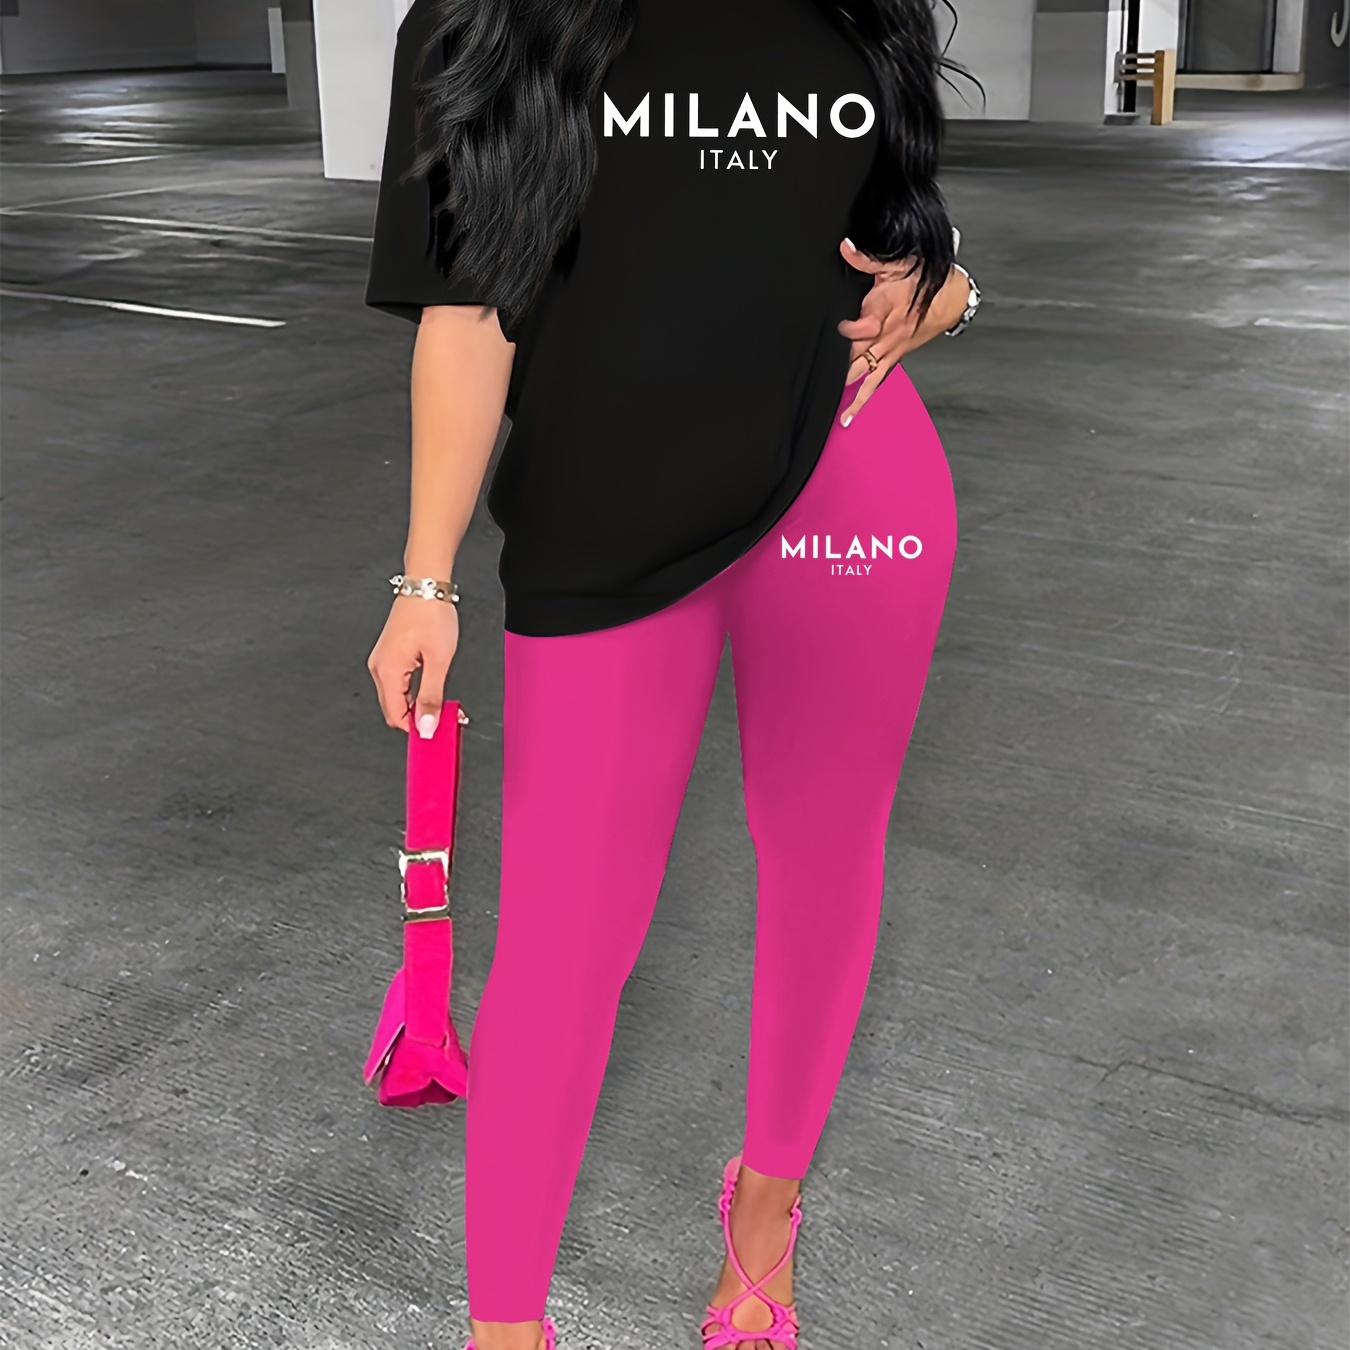 

Milano Print Casual 2 Piece Set, Short Sleeve Crew Neck T-shirt & Leggings Outfits, Women's Clothing